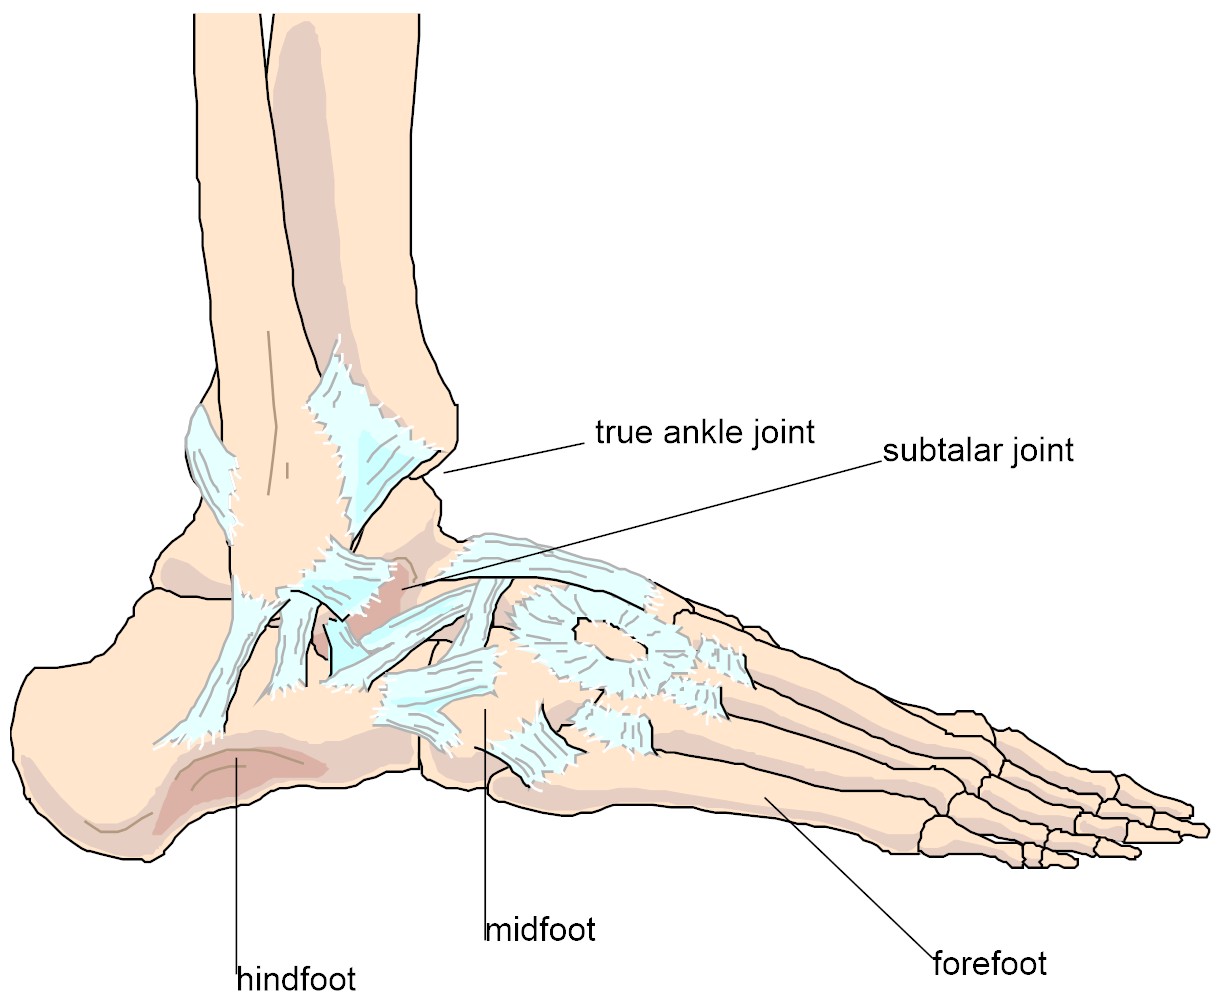 Figure 1: Anatomy of the foot and ankle